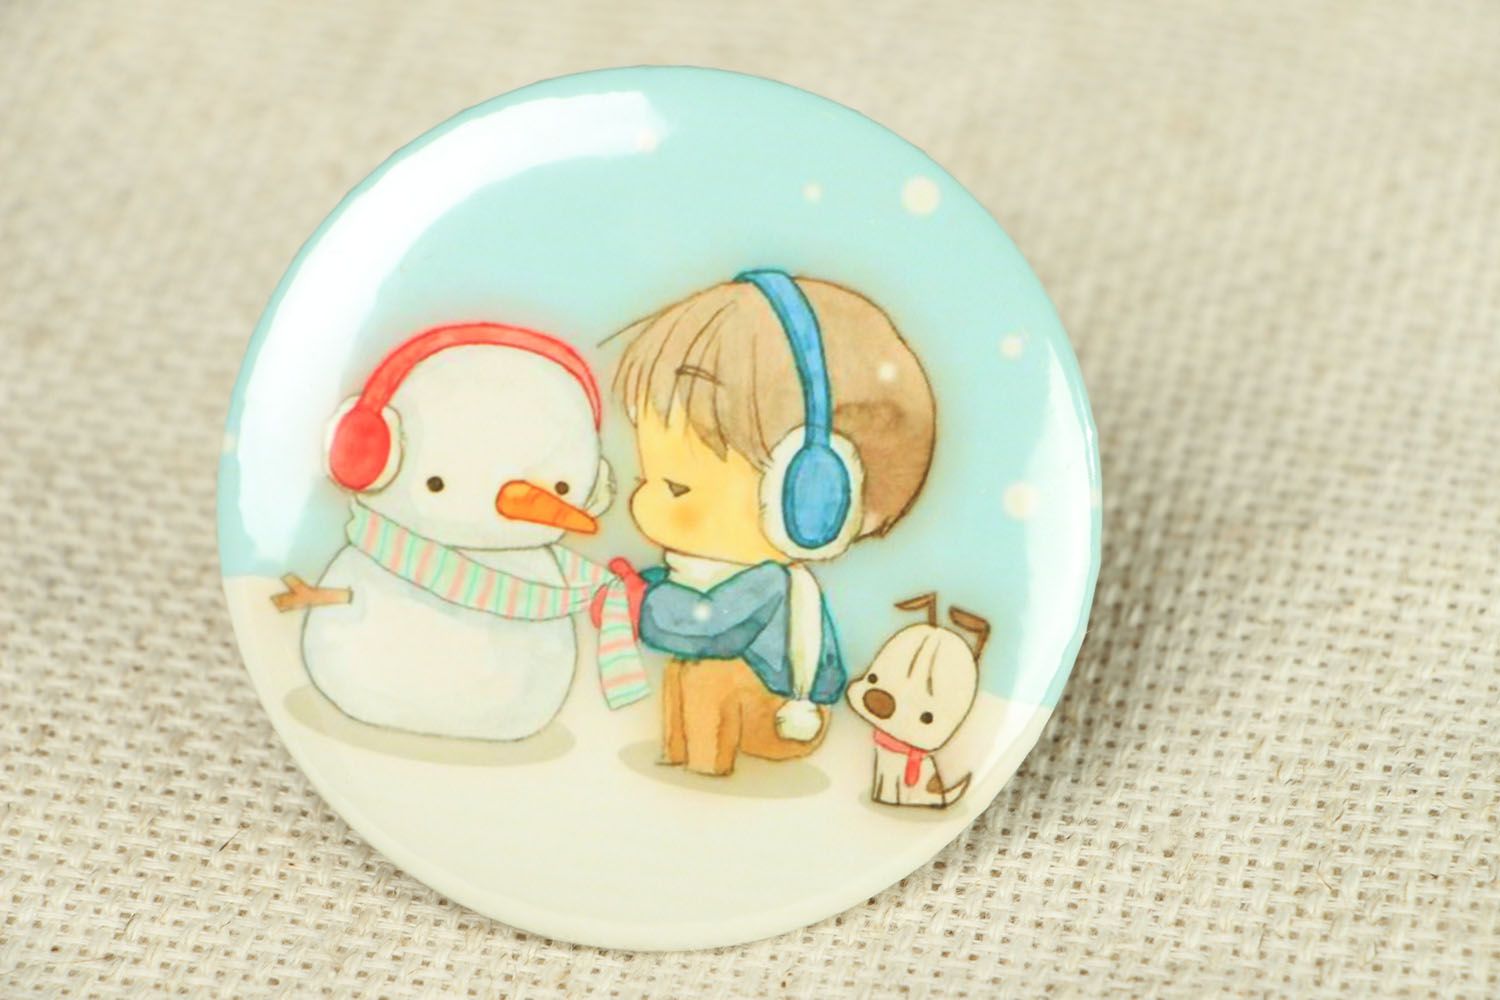 Pocket mirror with the image of snowman and boy photo 1